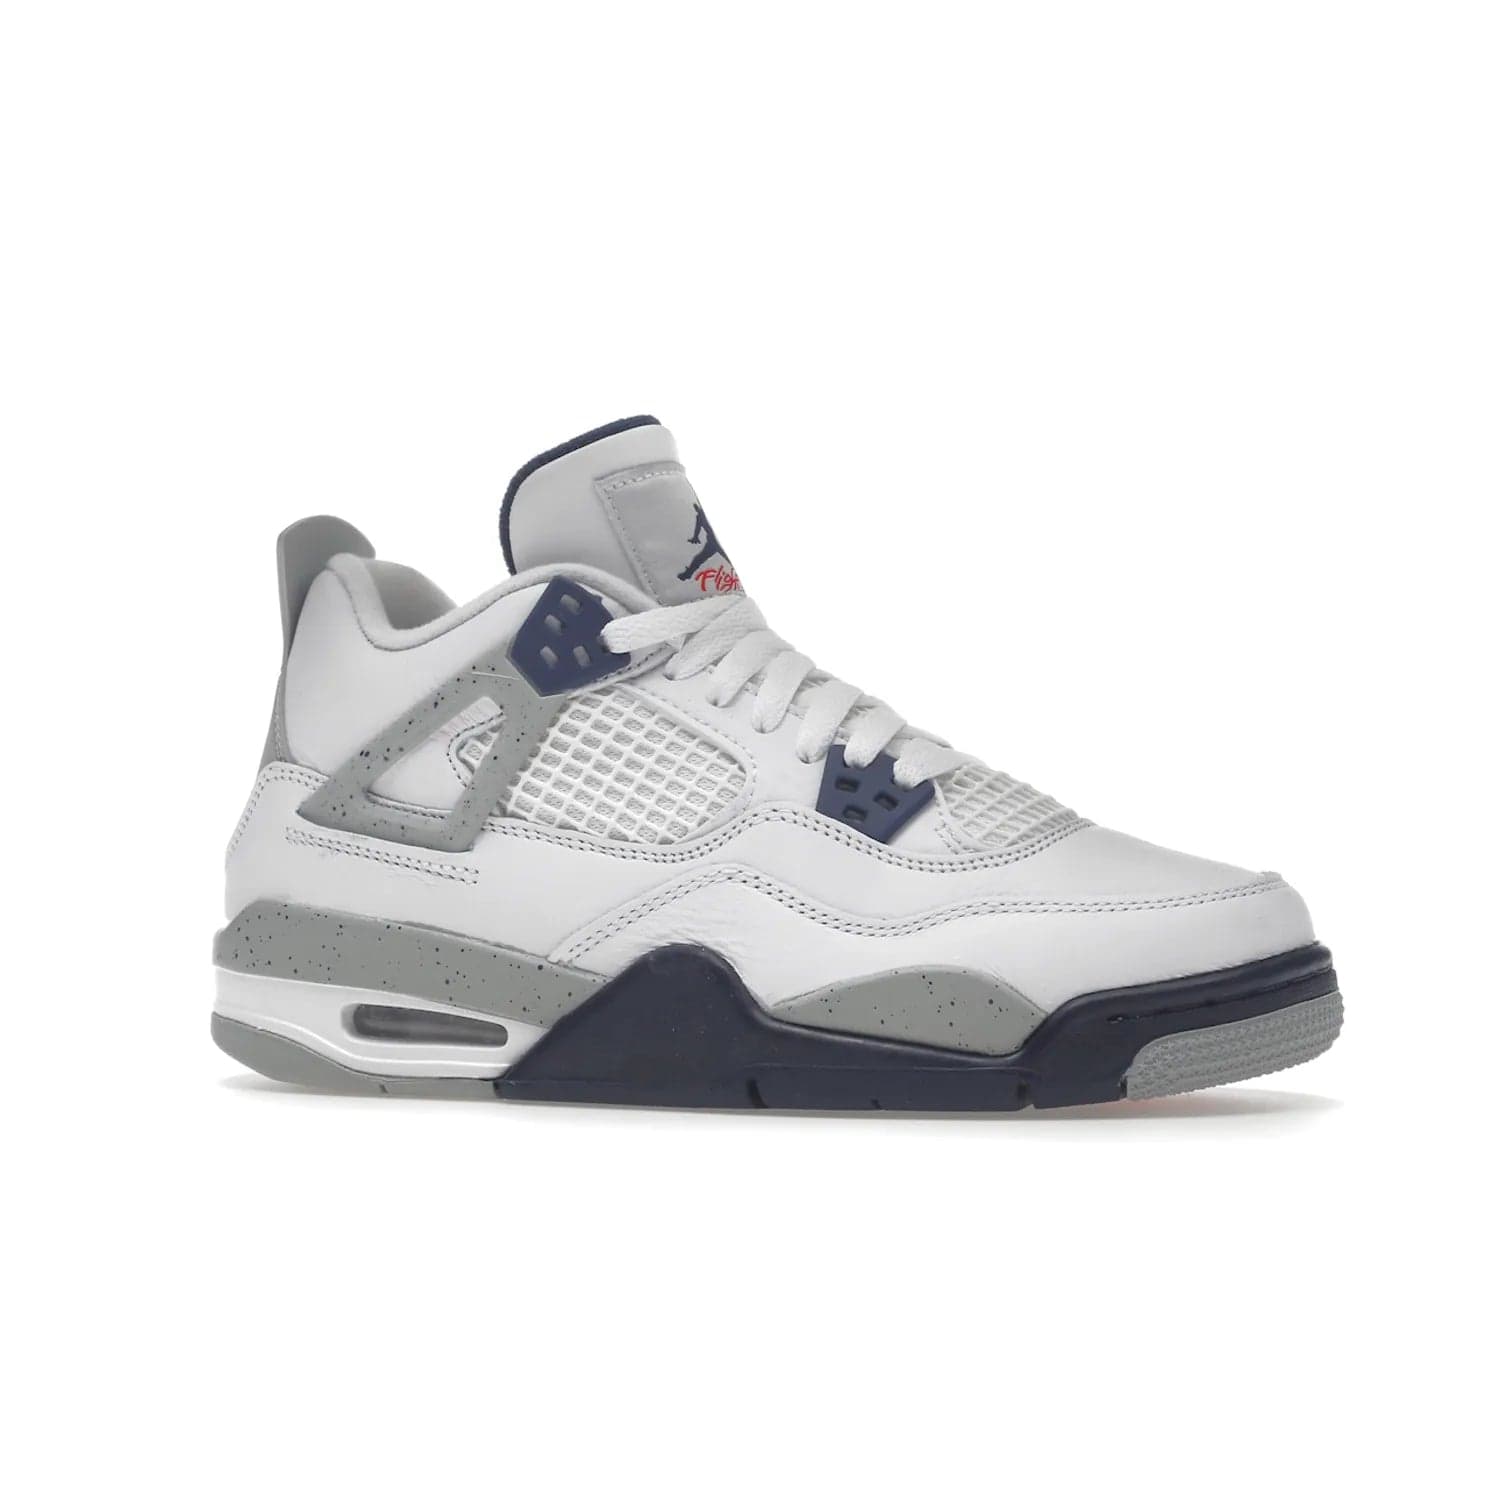 Jordan 4 Retro Midnight Navy (GS) - Image 3 - Only at www.BallersClubKickz.com - Shop the Air Jordan 4 Retro Midnight Navy GS. The white leather upper features black support wings & heel tab, navy eyelets & woven tongue tag with Jumpman logos. The midsole features two-tone polyurethane insole & AIR units in the heel & forefoot. Get the white/midnight navy/light smoke grey/fire colorway & show off your style.